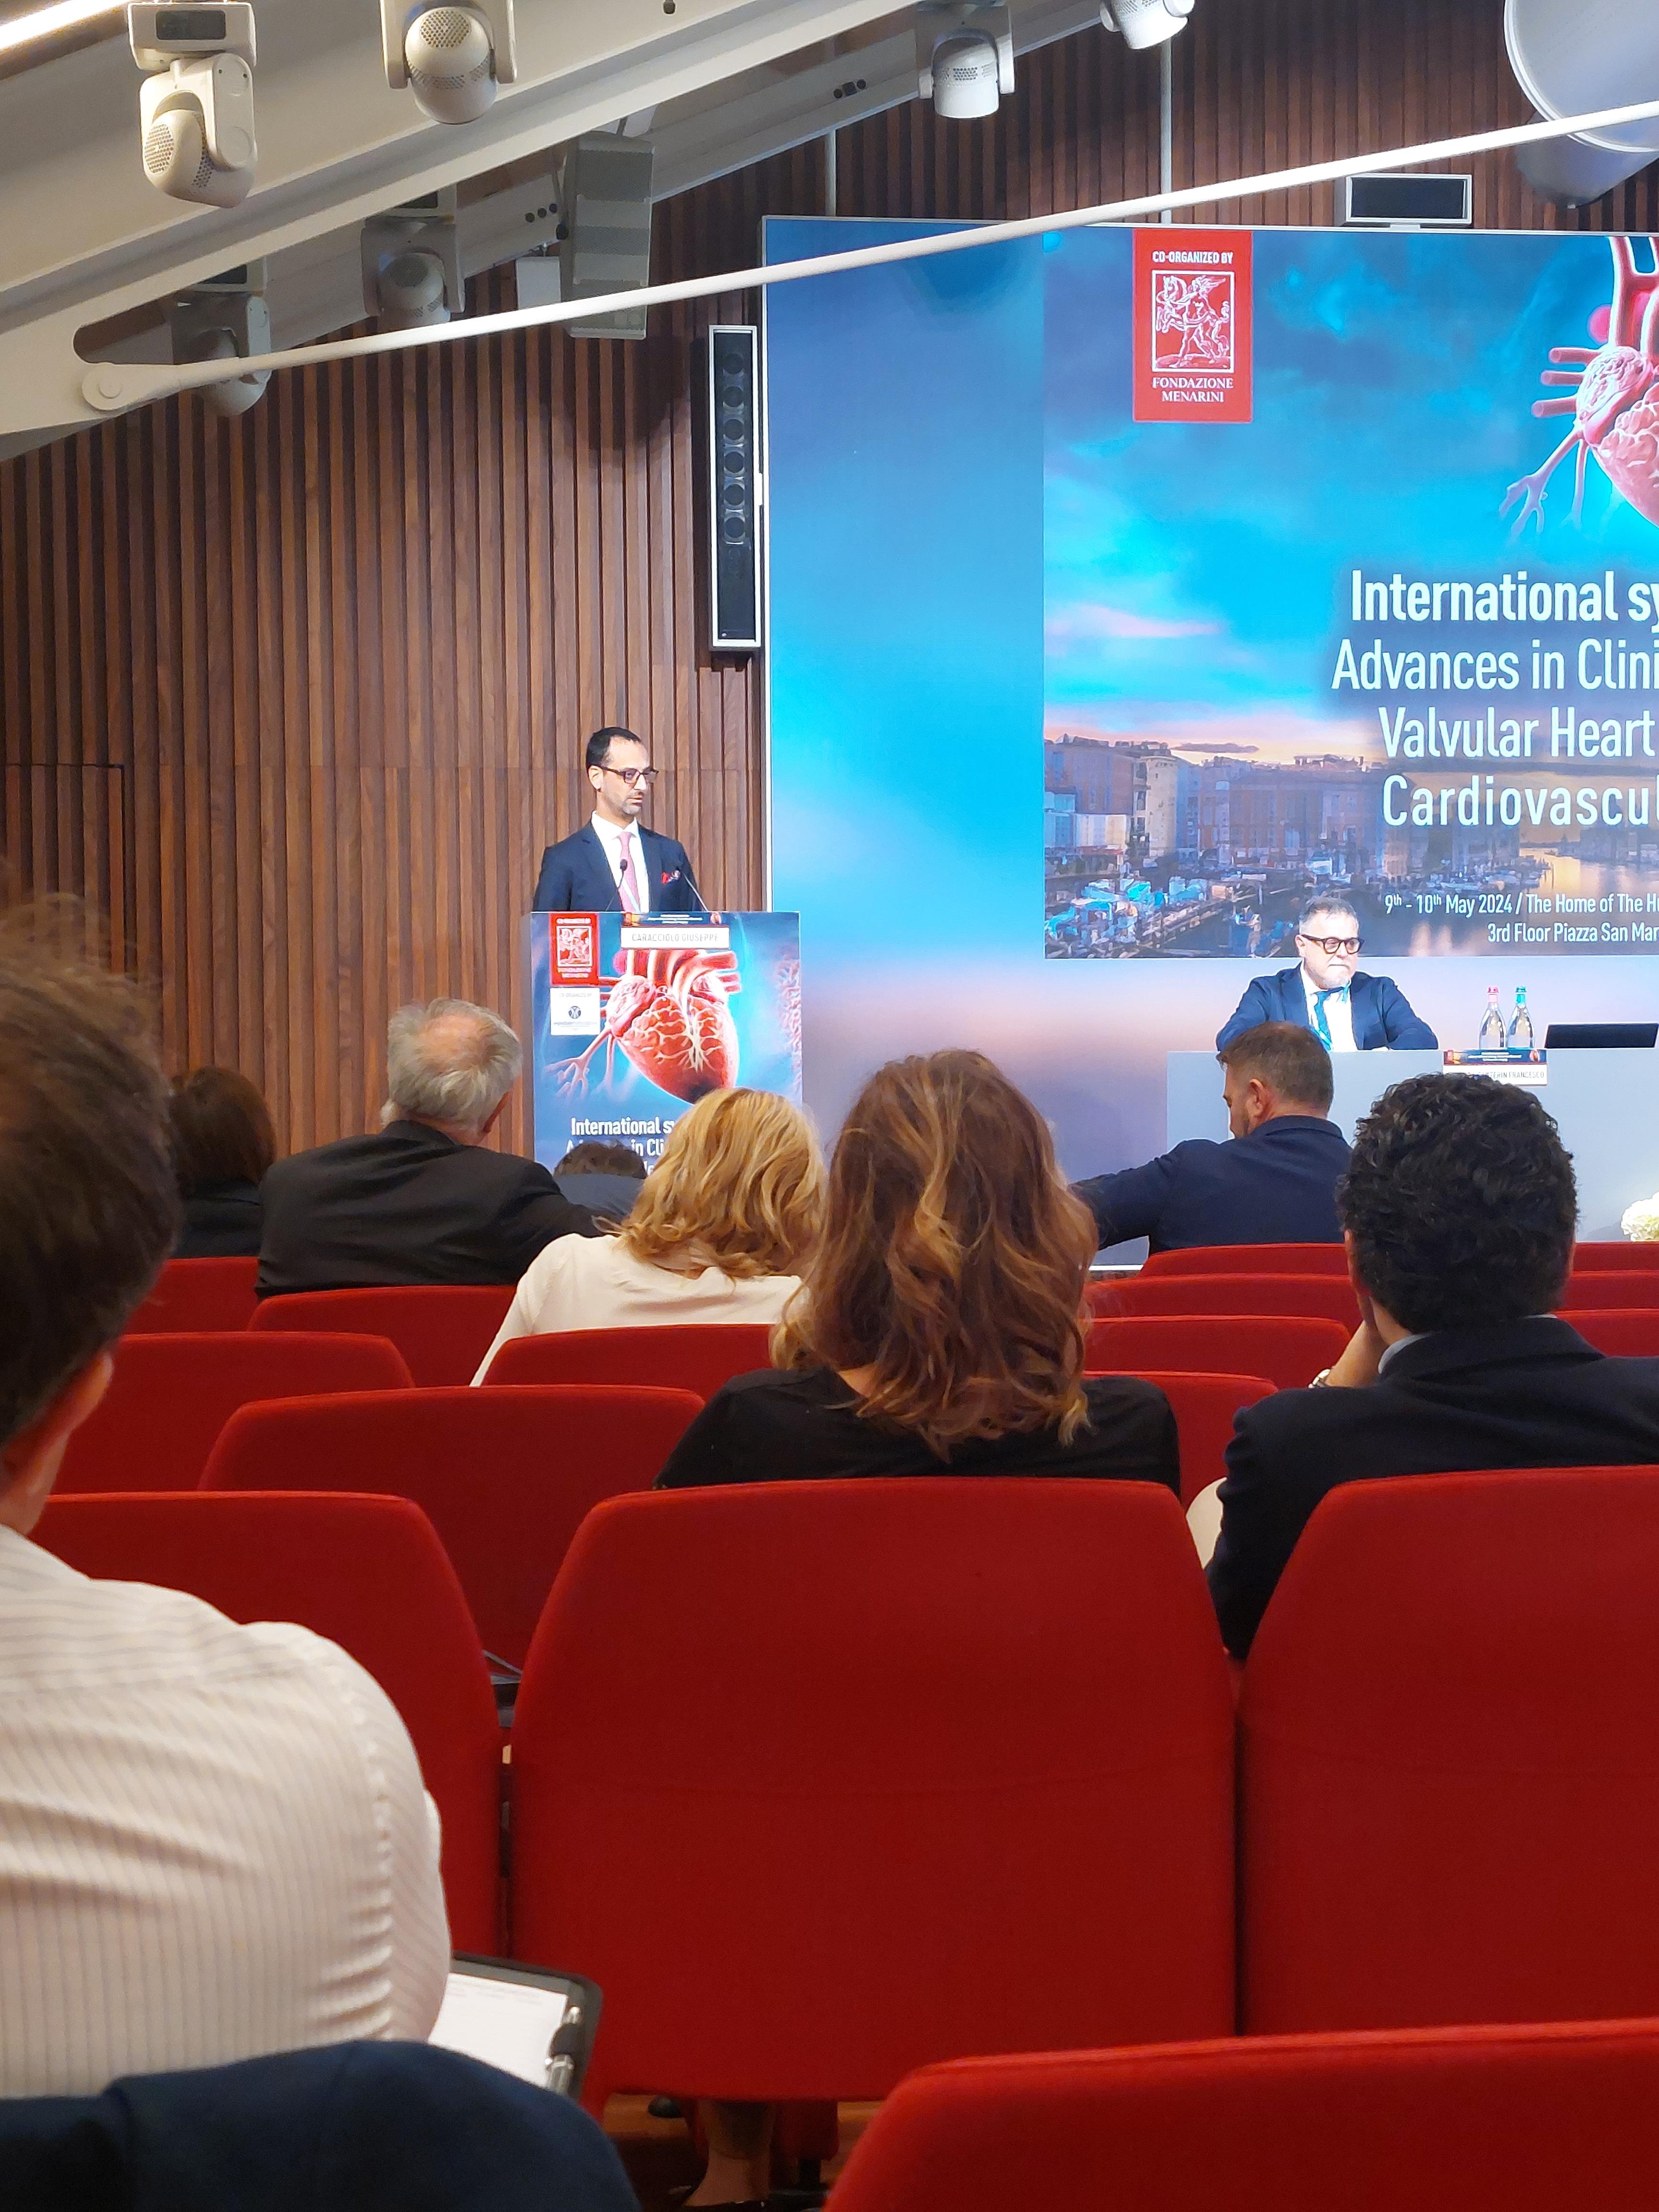 International Symposium on: Advances in Clinical Cardiology, Valvular Heart Disease and Cardiovascular Imaging